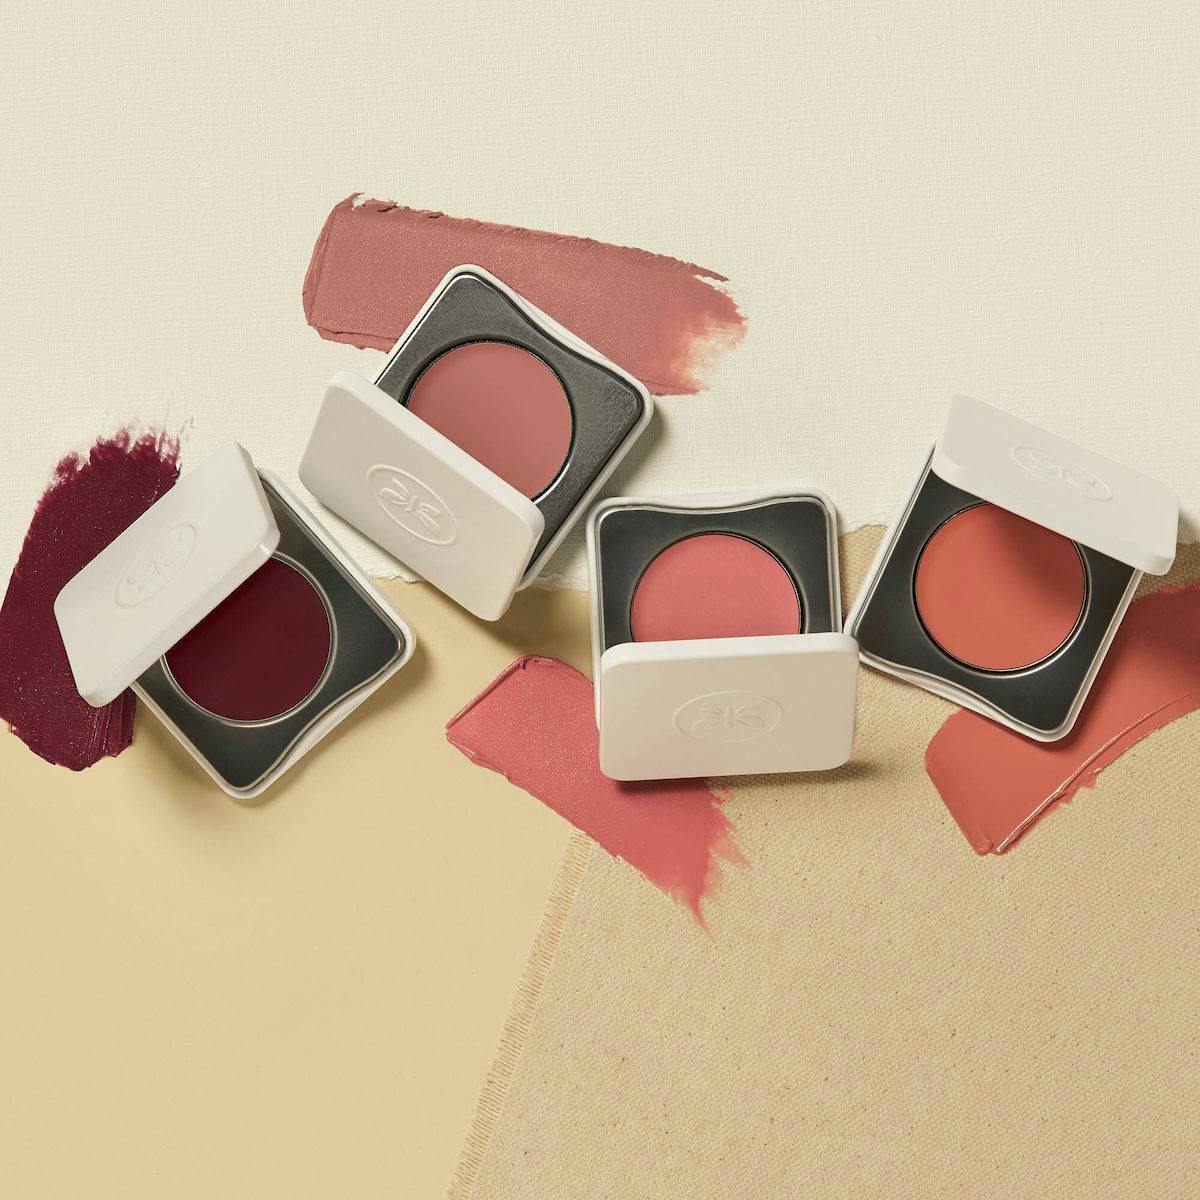 A selection of four Cream Cheek + Lip Colors from The Honest Company.